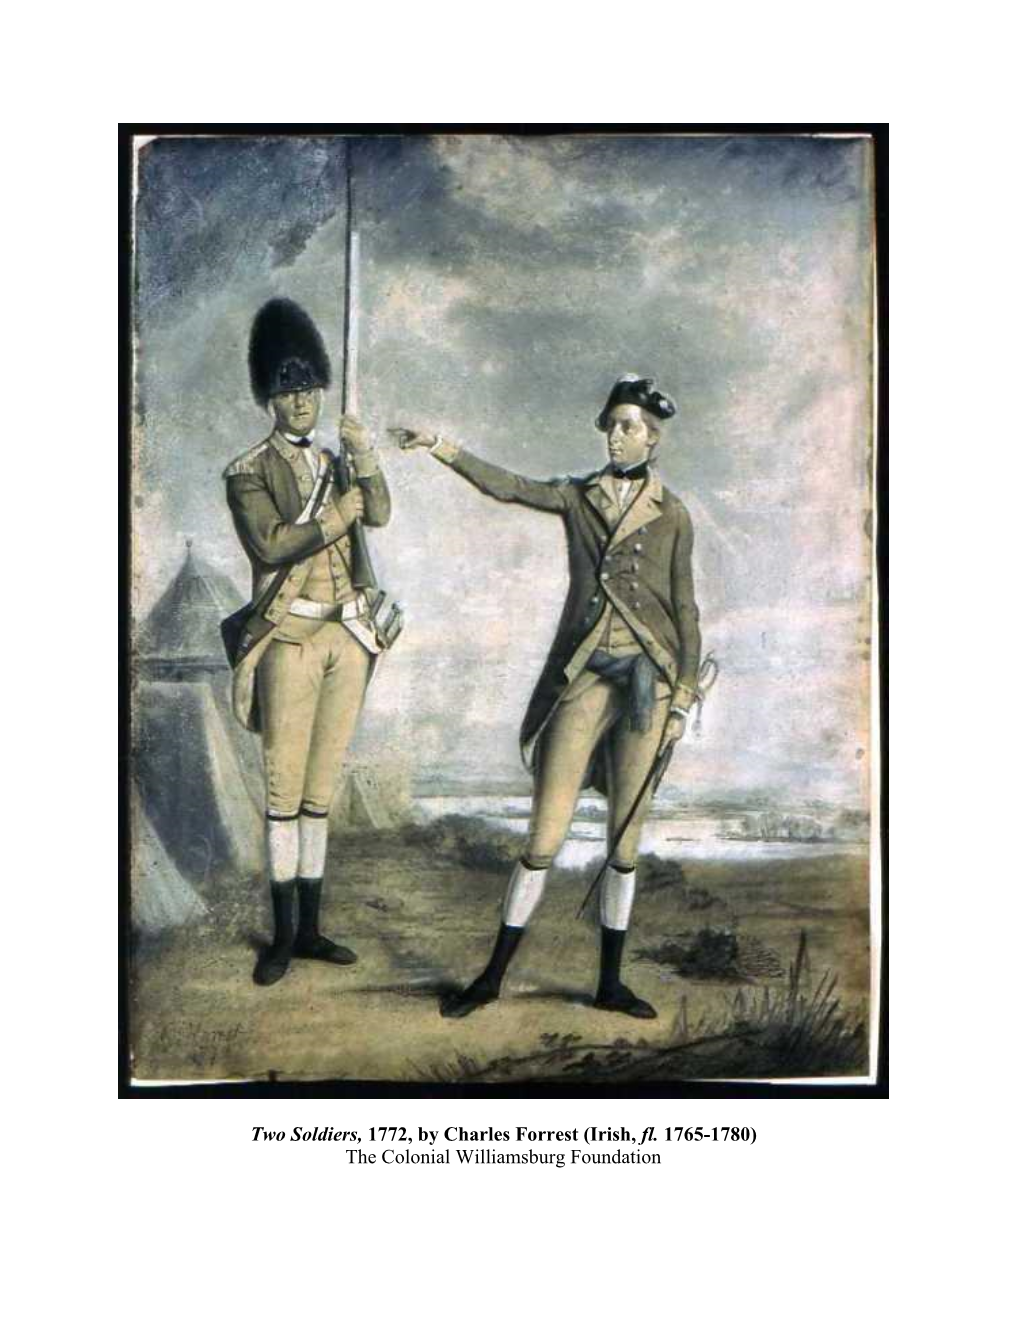 Identification of the British Regiment Represented in Charles Forrest's 1772 Pastel Drawing